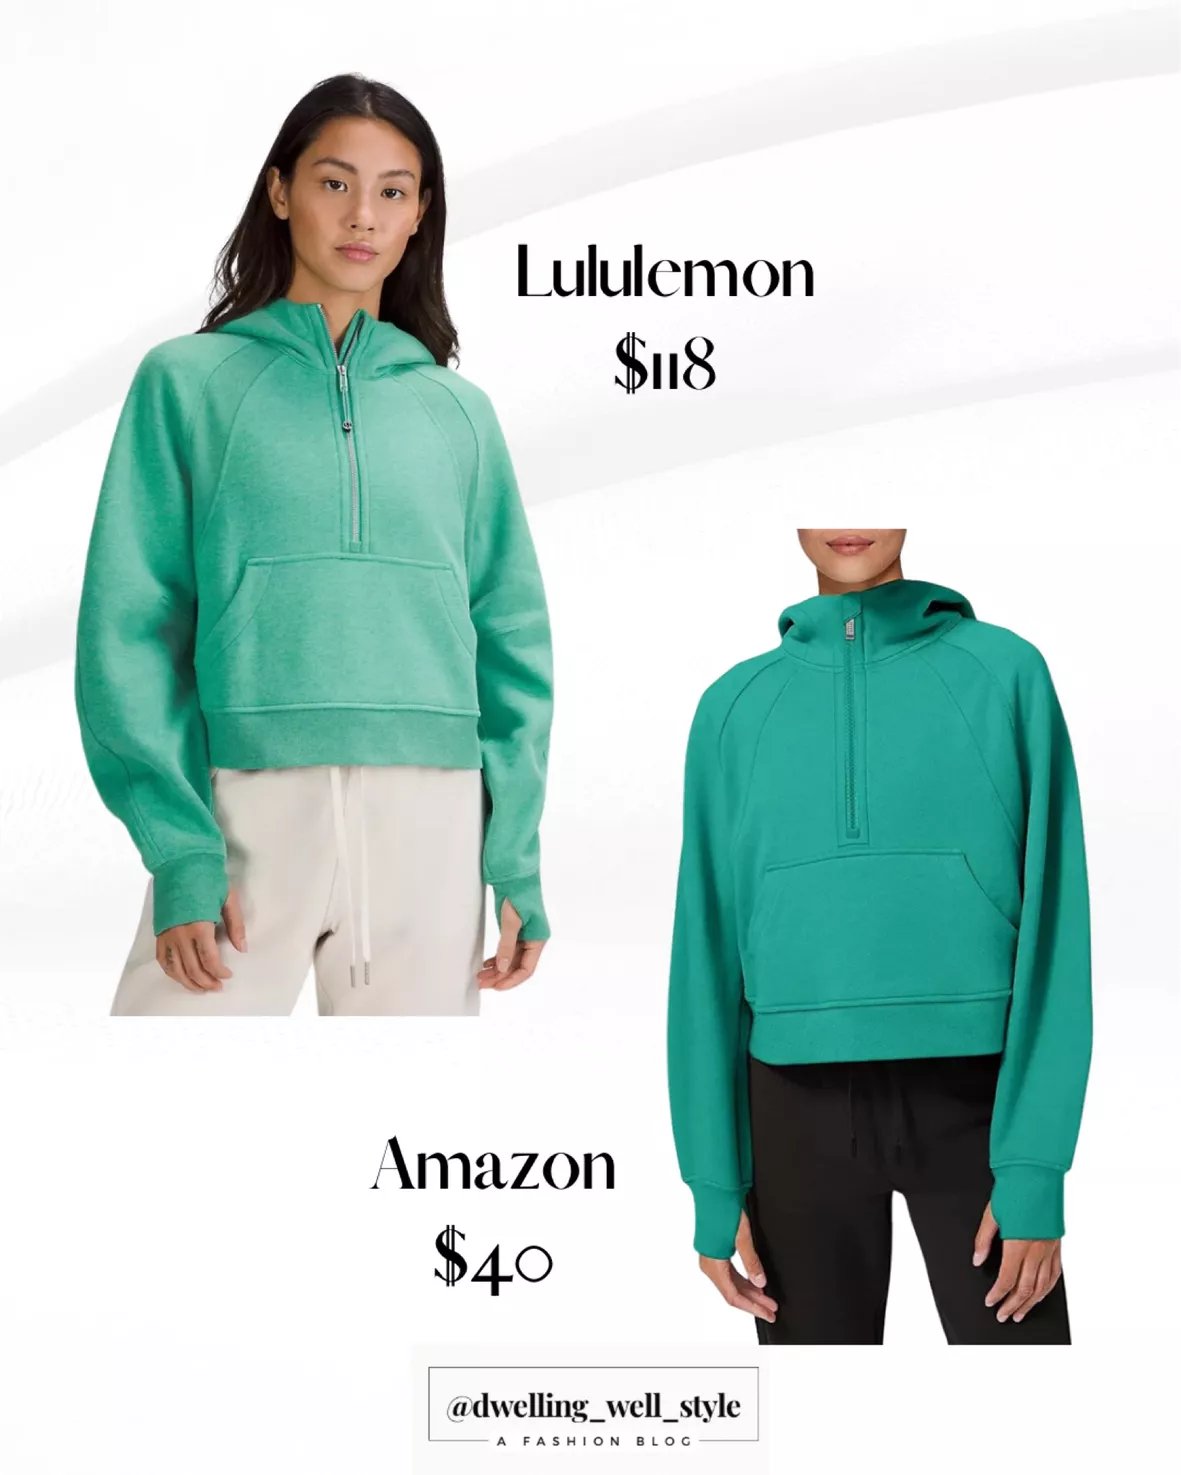 1/2 zip scuba hoodie dupe? budget friendly option, if you like the style of  the 1/2 scubas! : r/lululemon